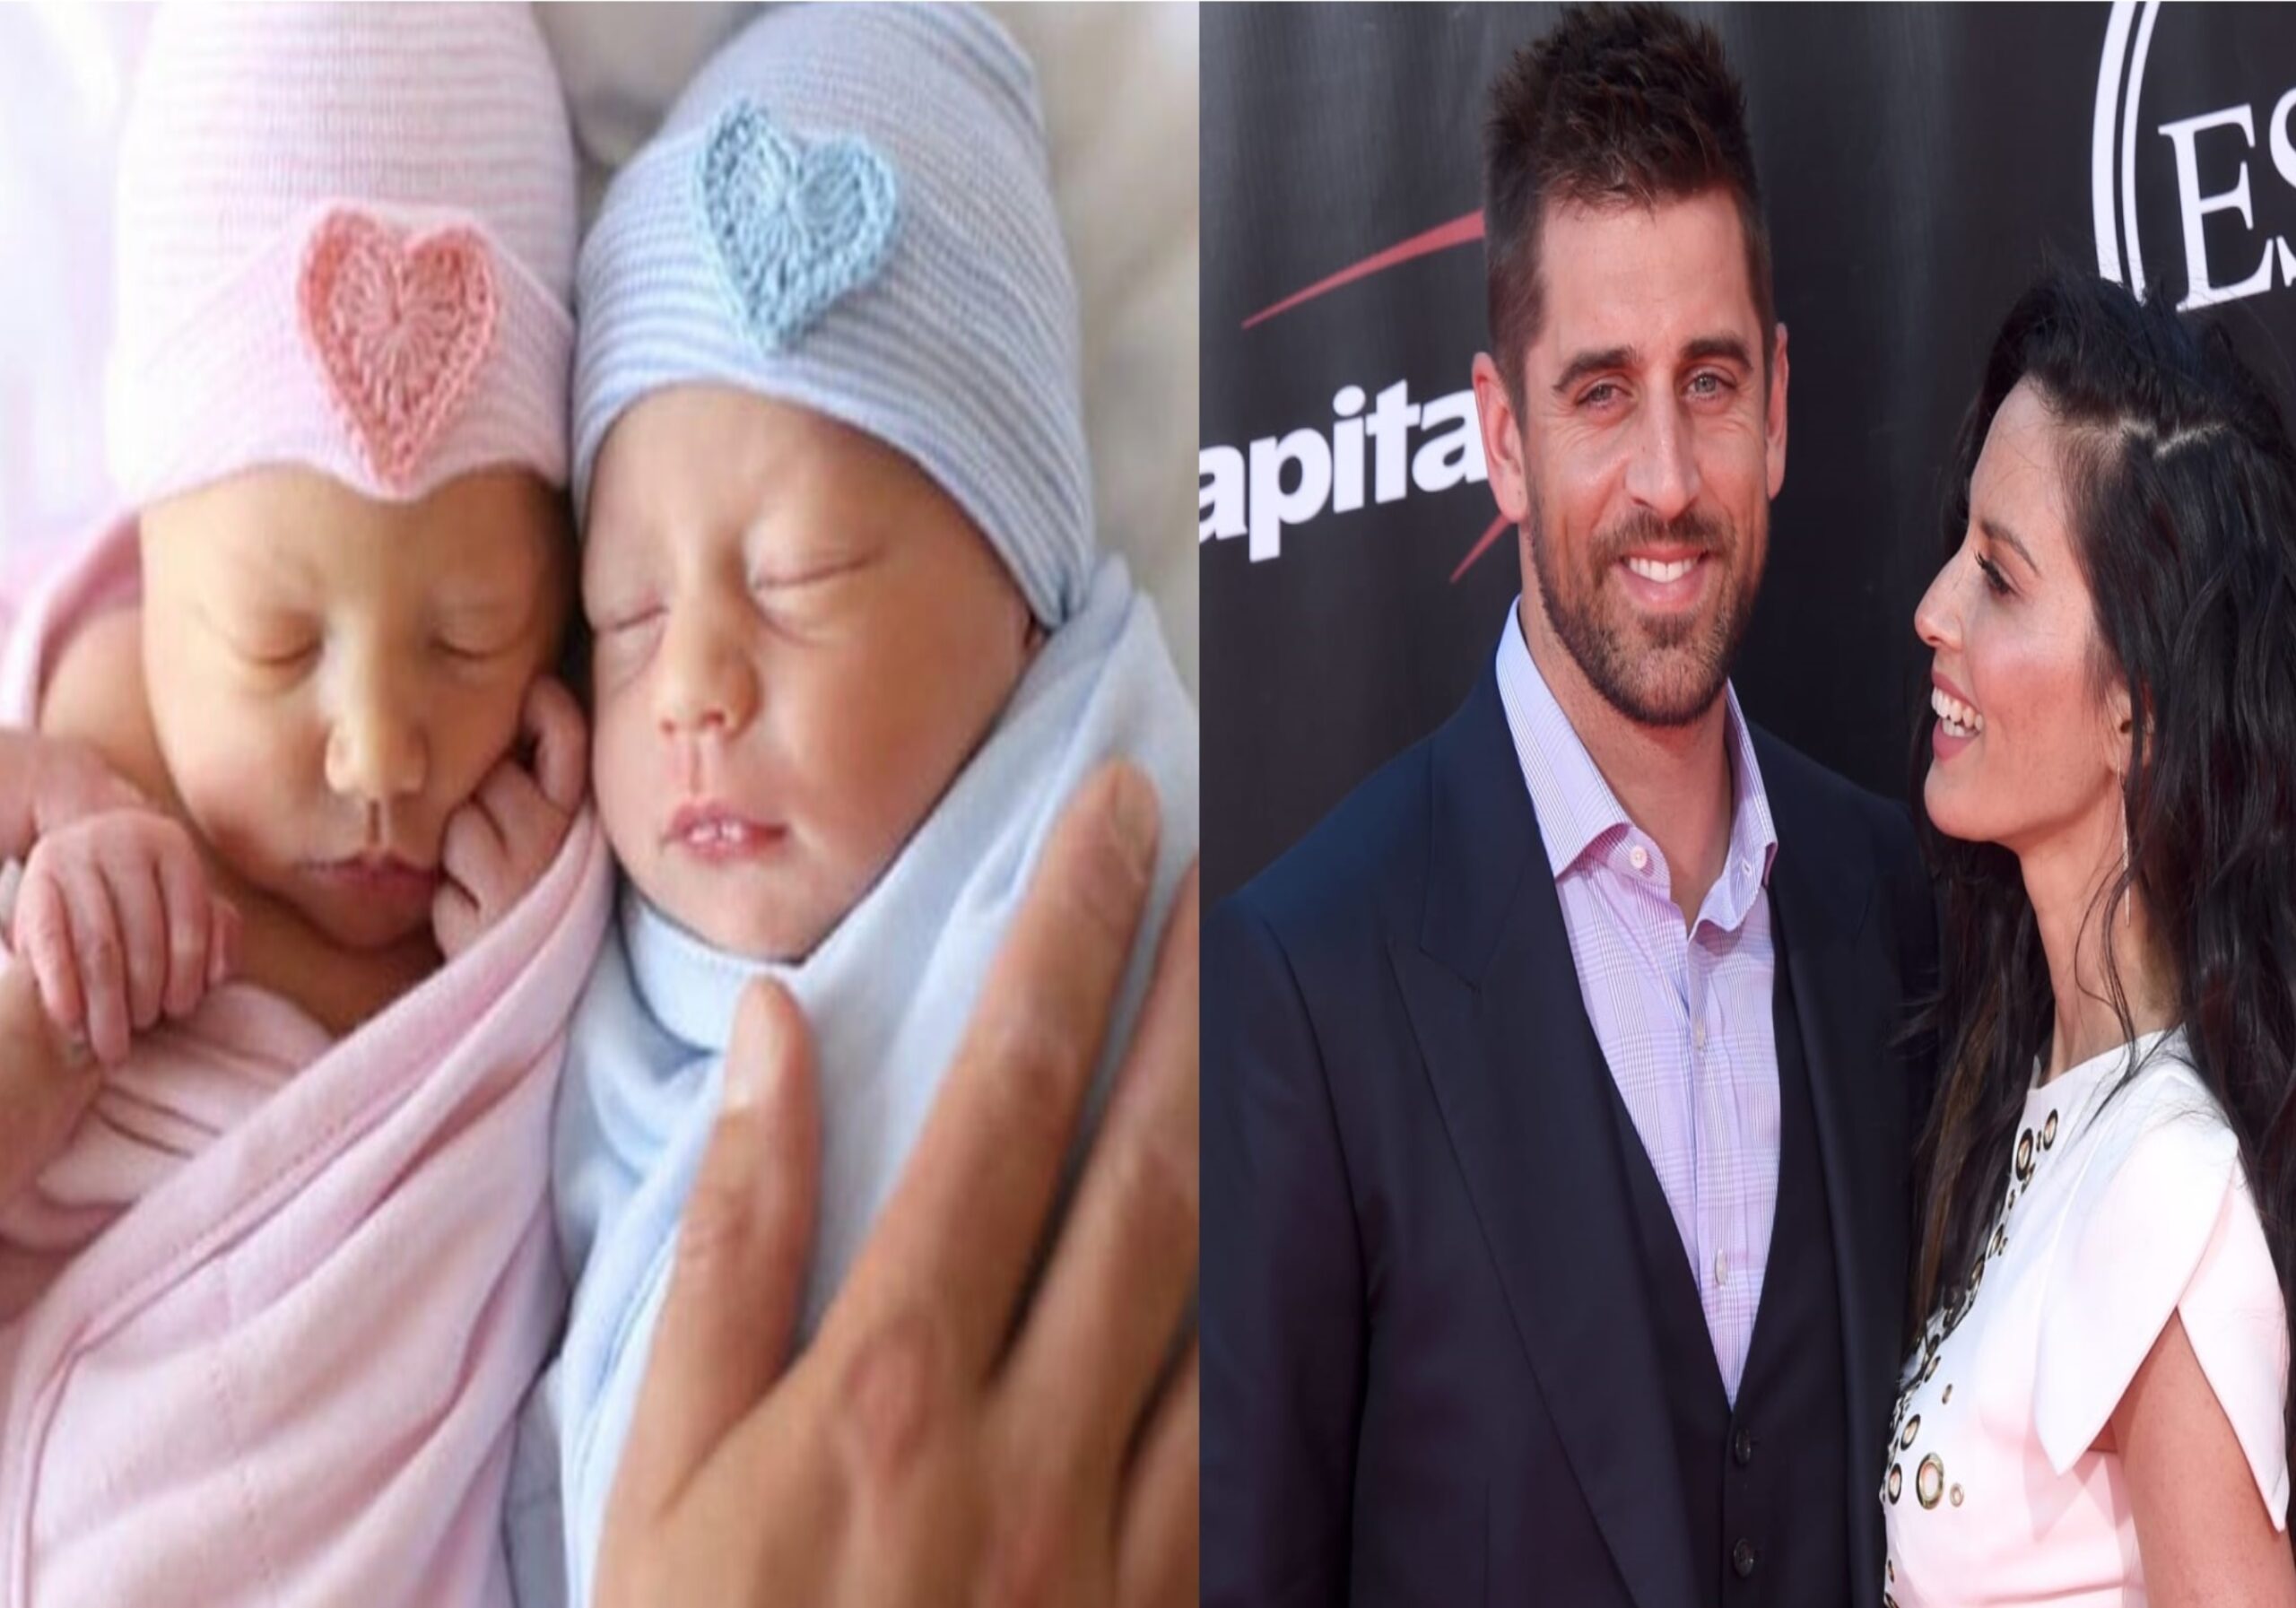  NFL Star Aaron Rodgers joyfully welcomes a beautiful set of twin babies with his soon-to-be wife